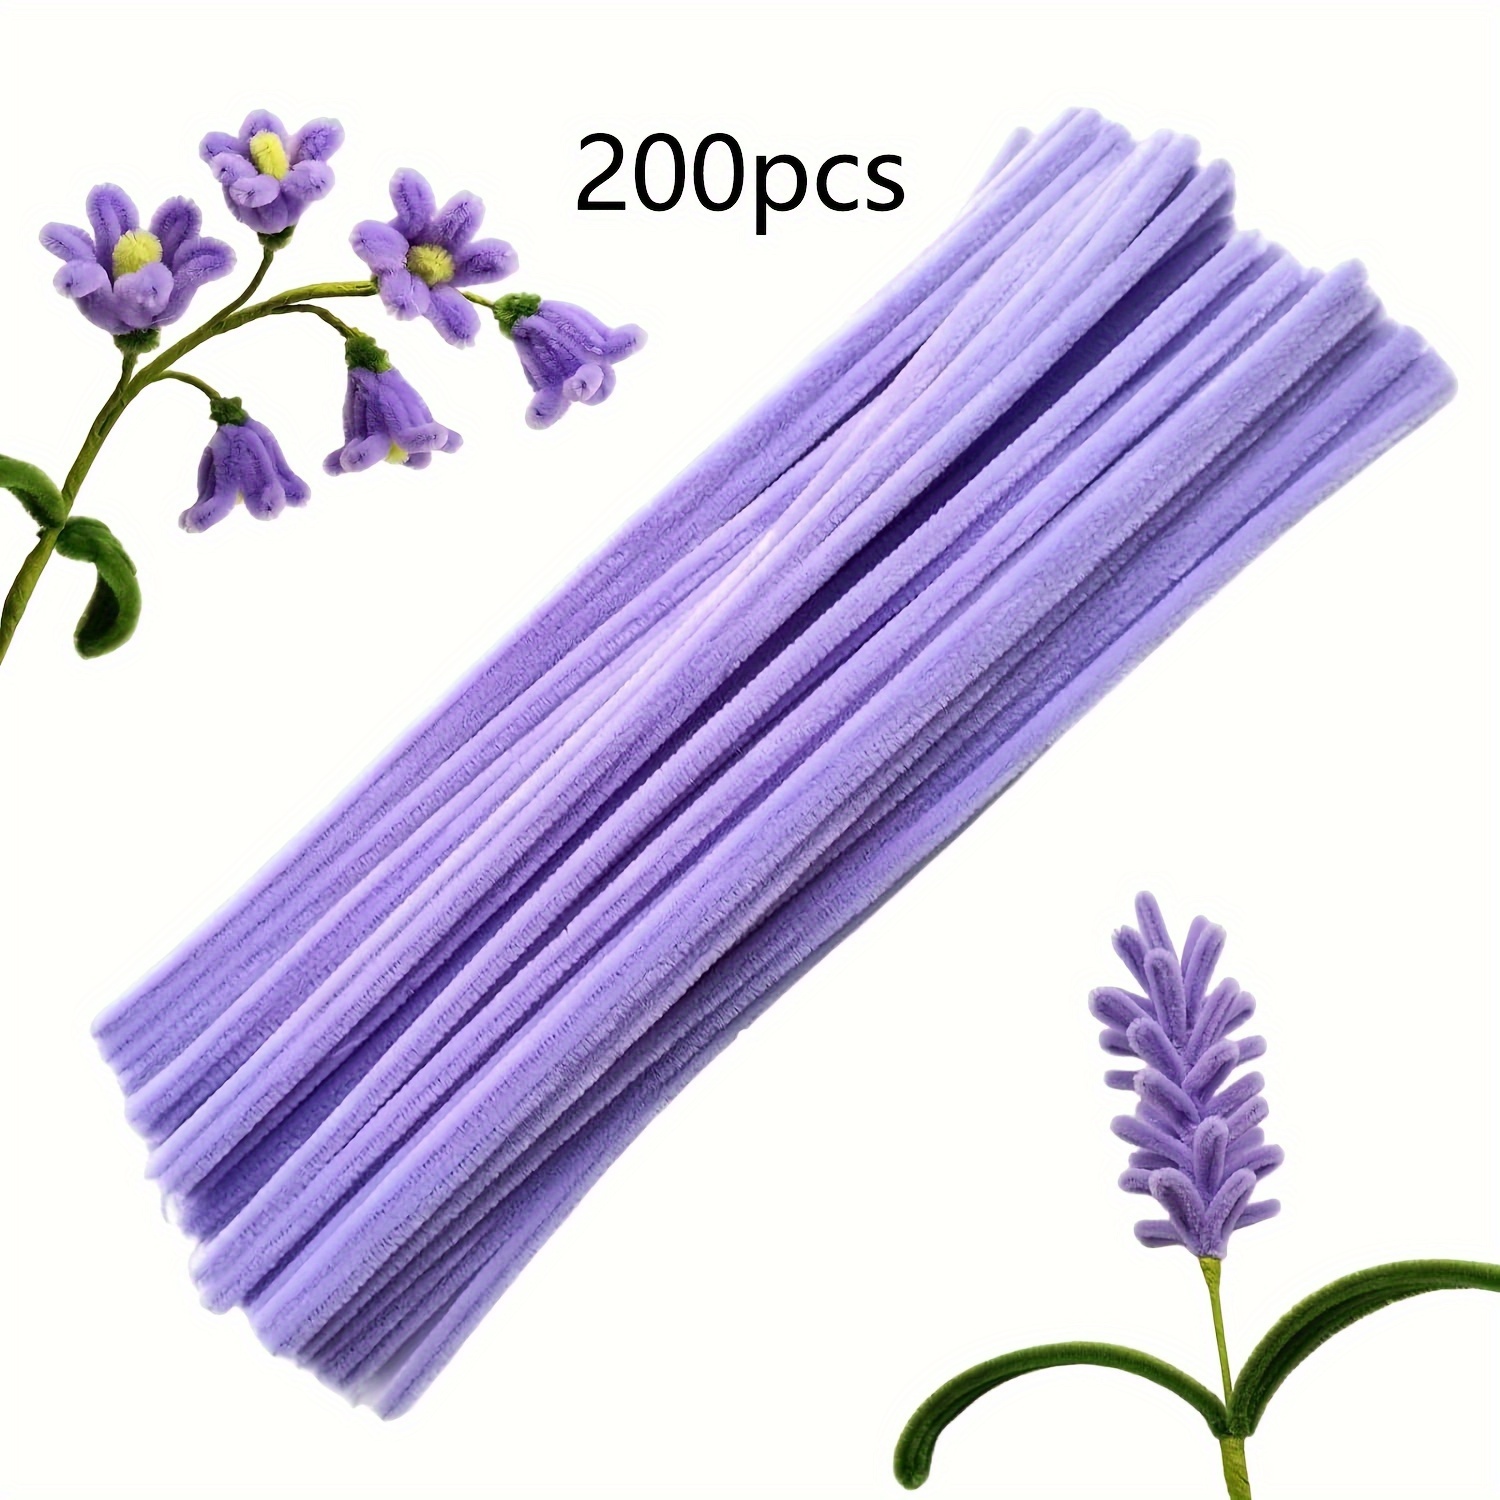 

200pcs Light Purple Pipe Cleaners Set For Crafts, Upgrade Furry Chenille Stems Twist Stick, Diy Arts Crafts Project, Creative Home Decoration Supplies, Flower Bouquet Supplies Leaf Stem Handicrafts